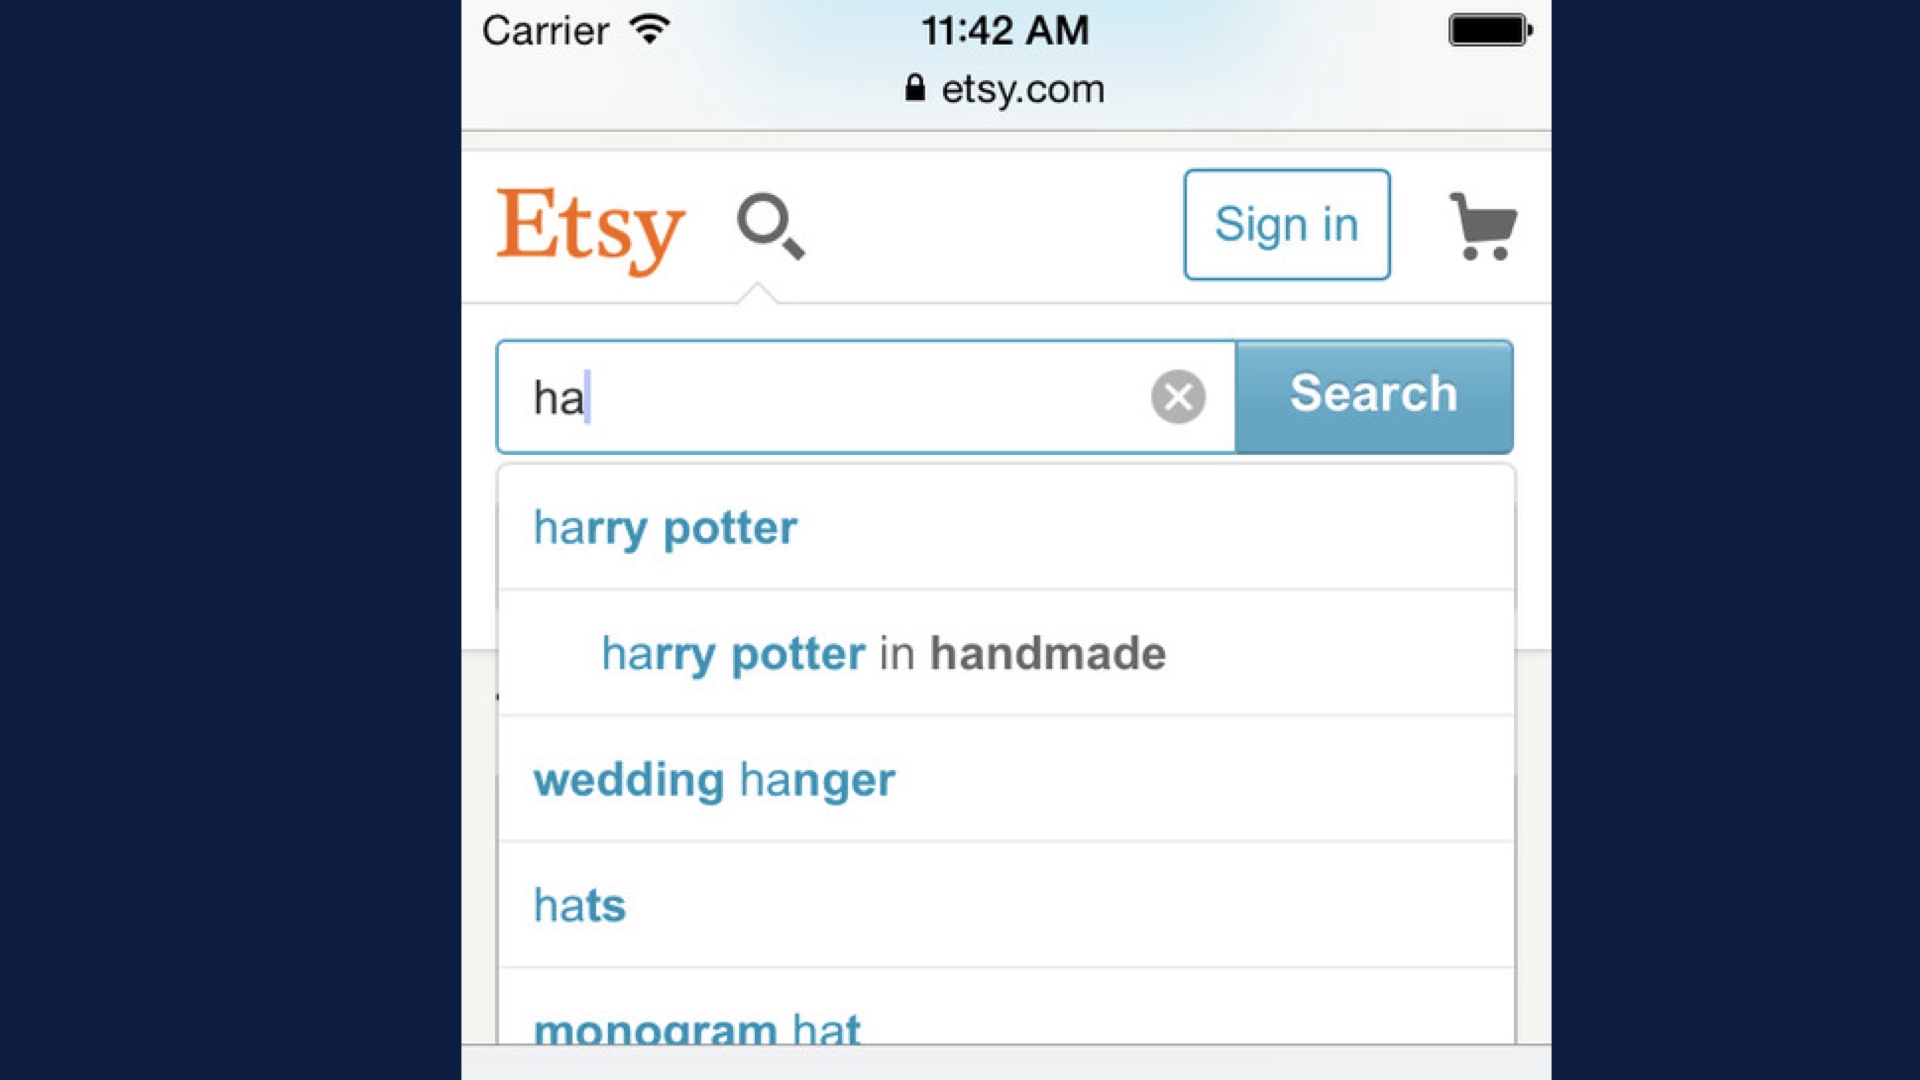 Slide image: autocomplete on Etsy completes ha with harry potter